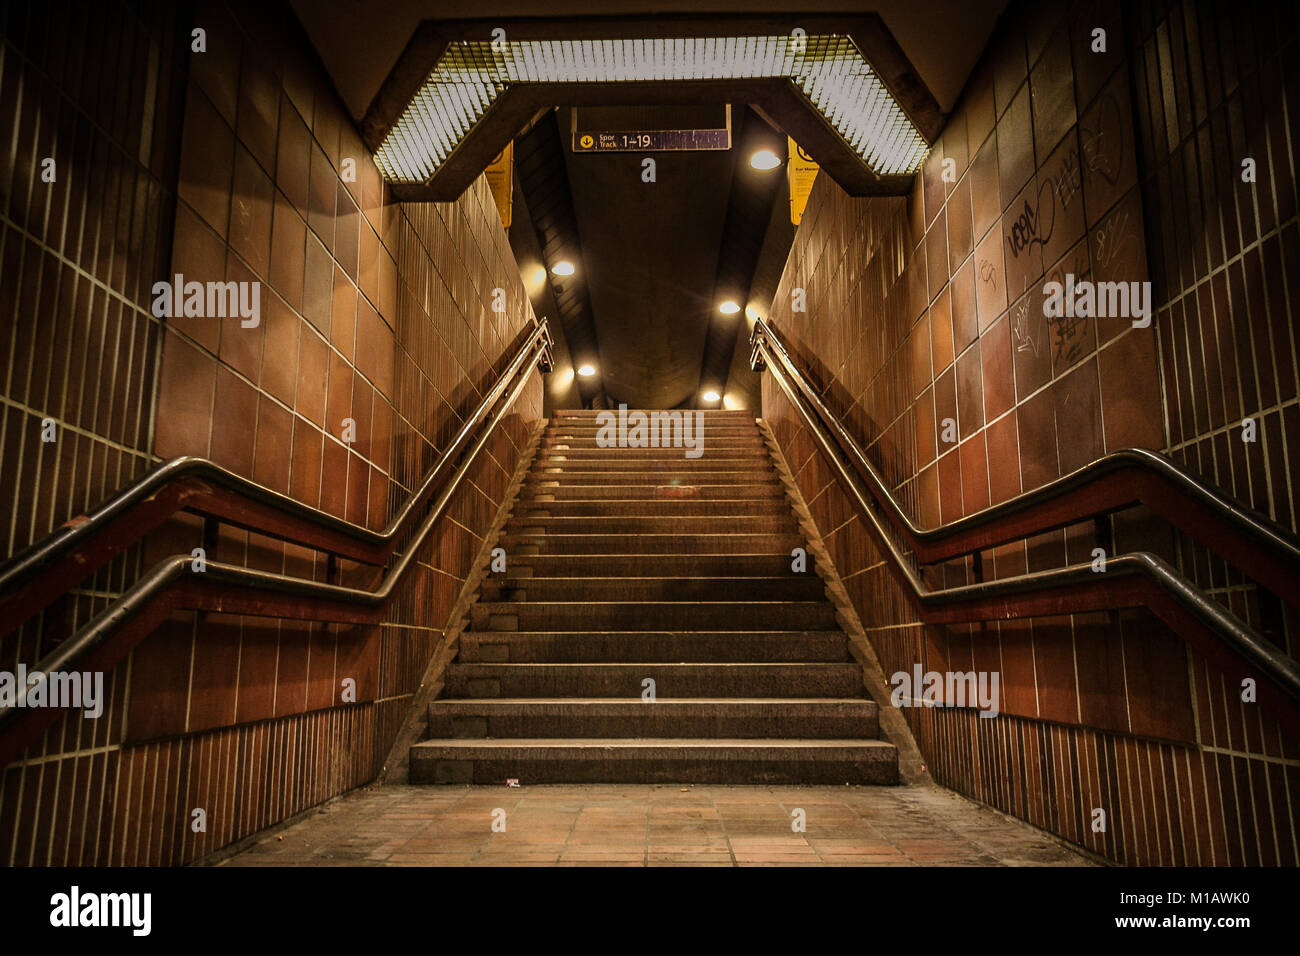 Stairs leading up from underground tunnel at a train station. Brown, dark color tones, scary, moody, atmospheric look. Stock Photo